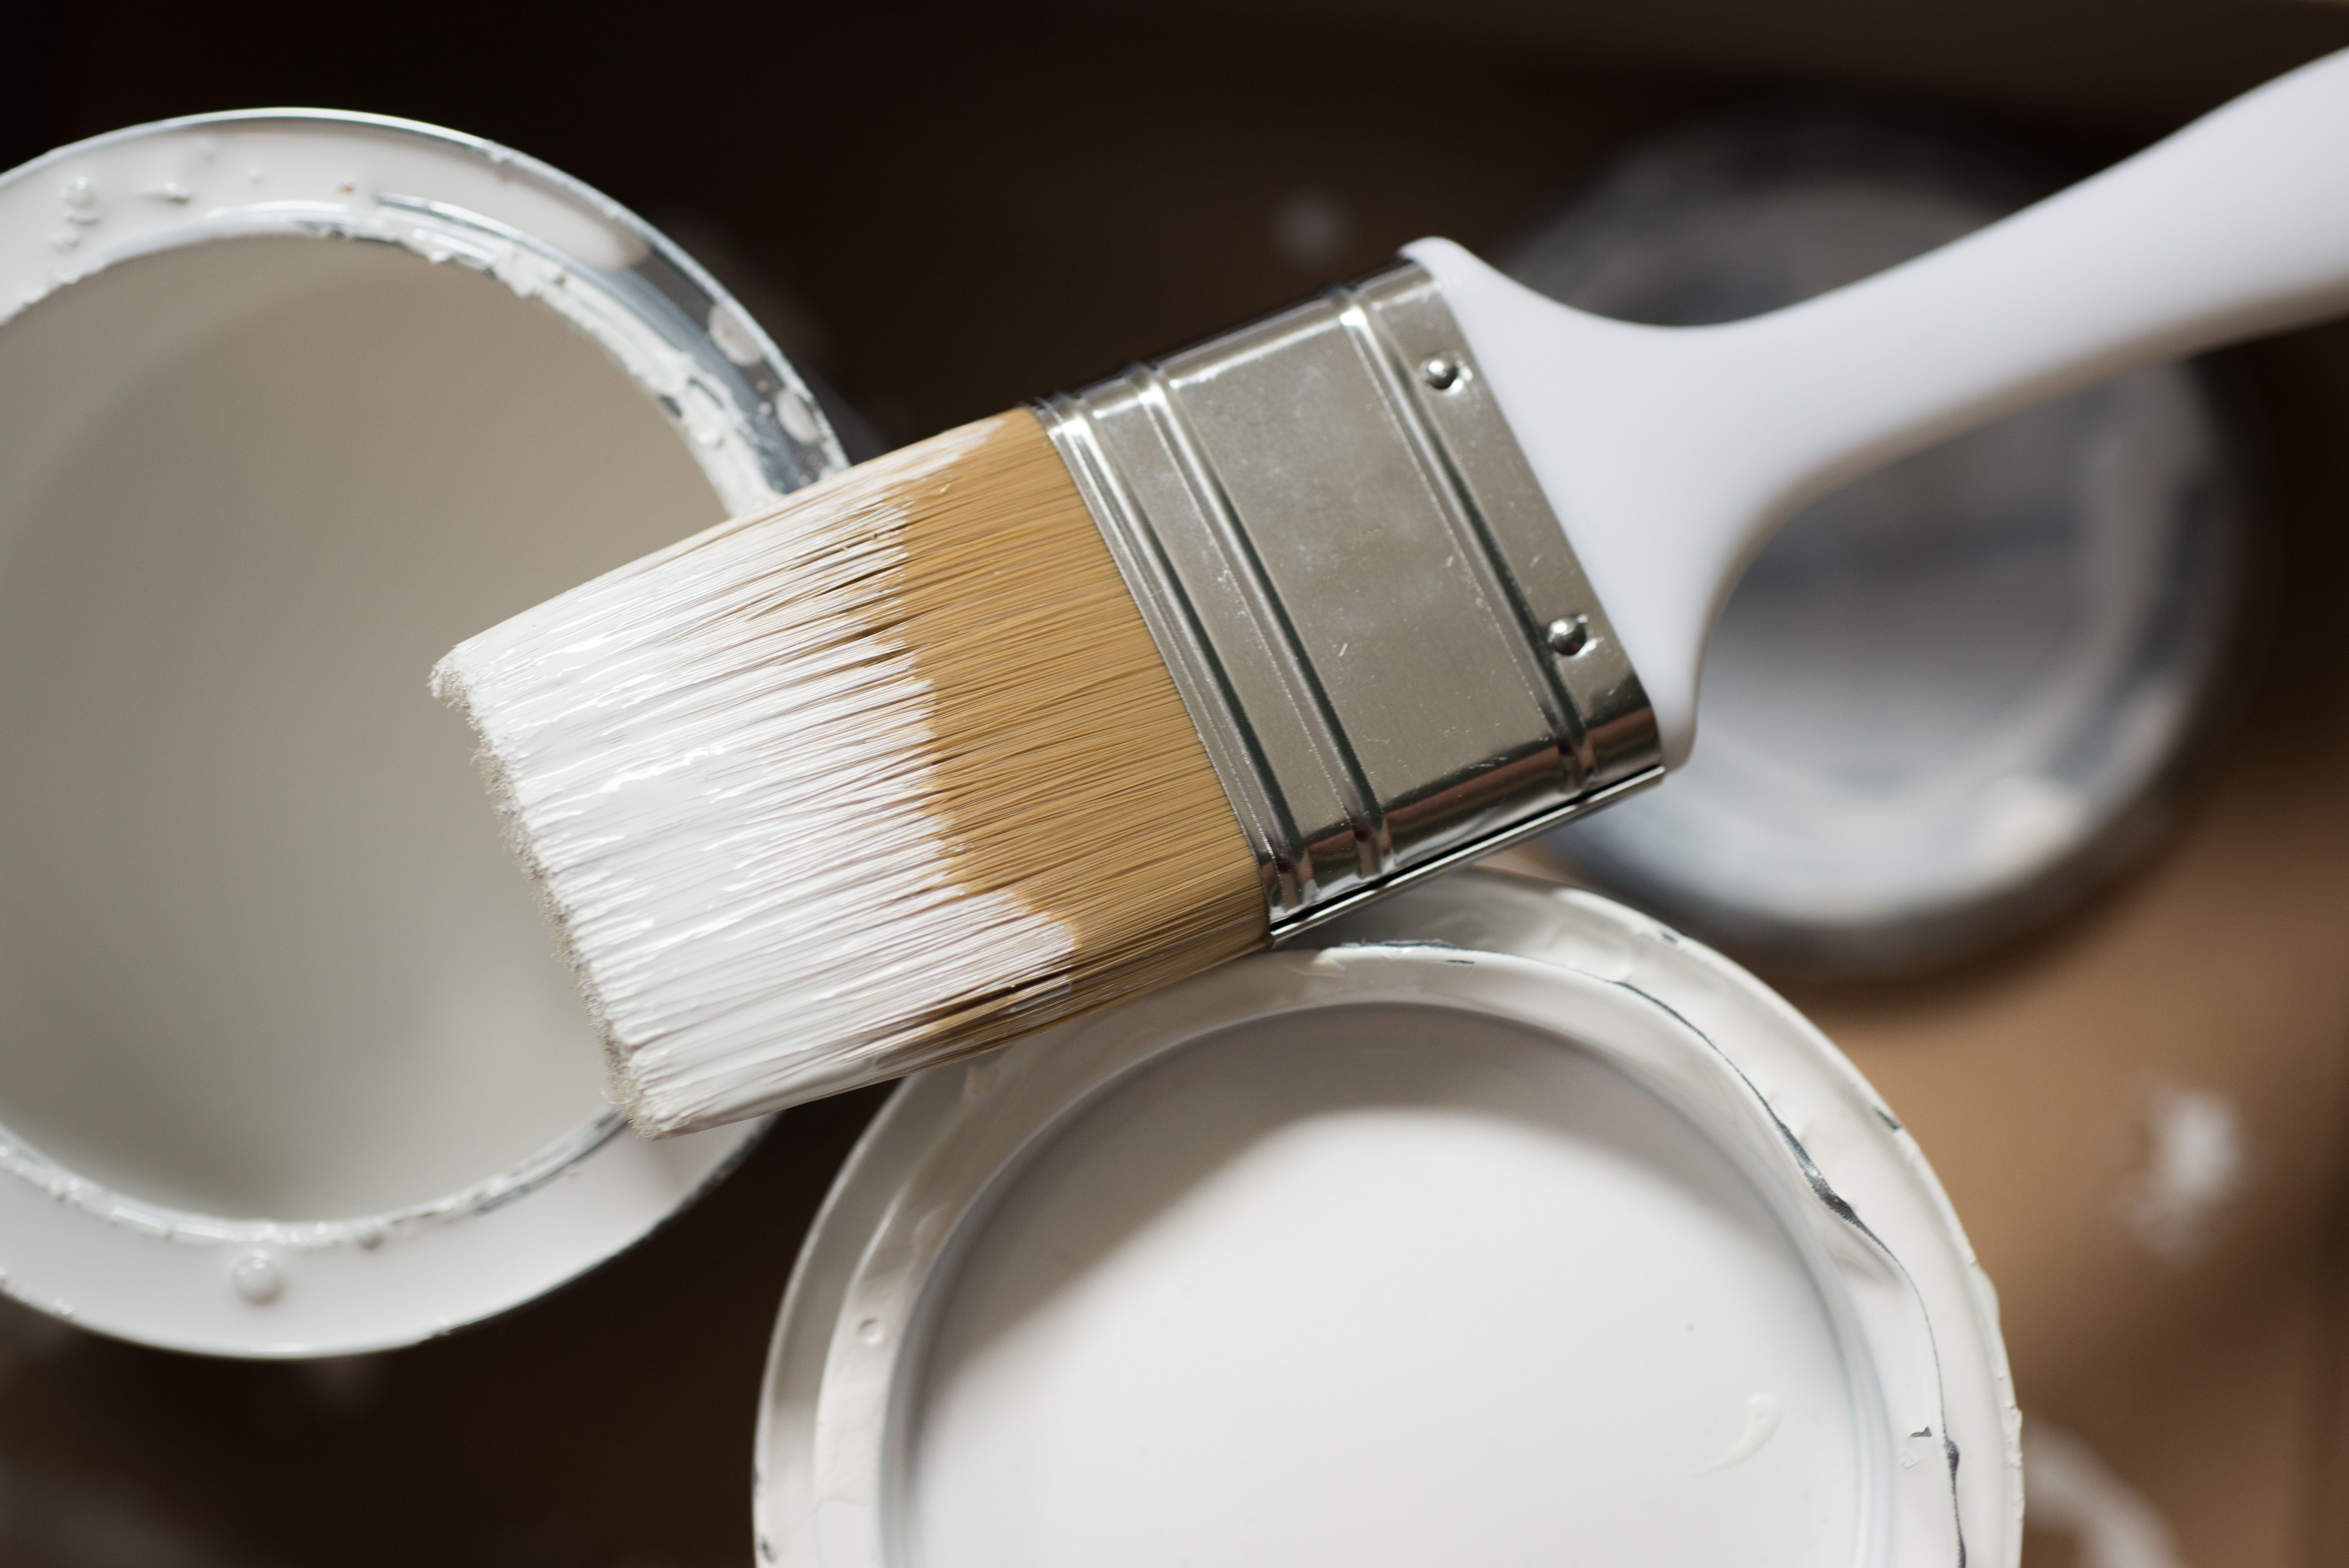 A white paint brush on top of 2 white paint cans, reflecting ongoing home improvements and refurbishments.